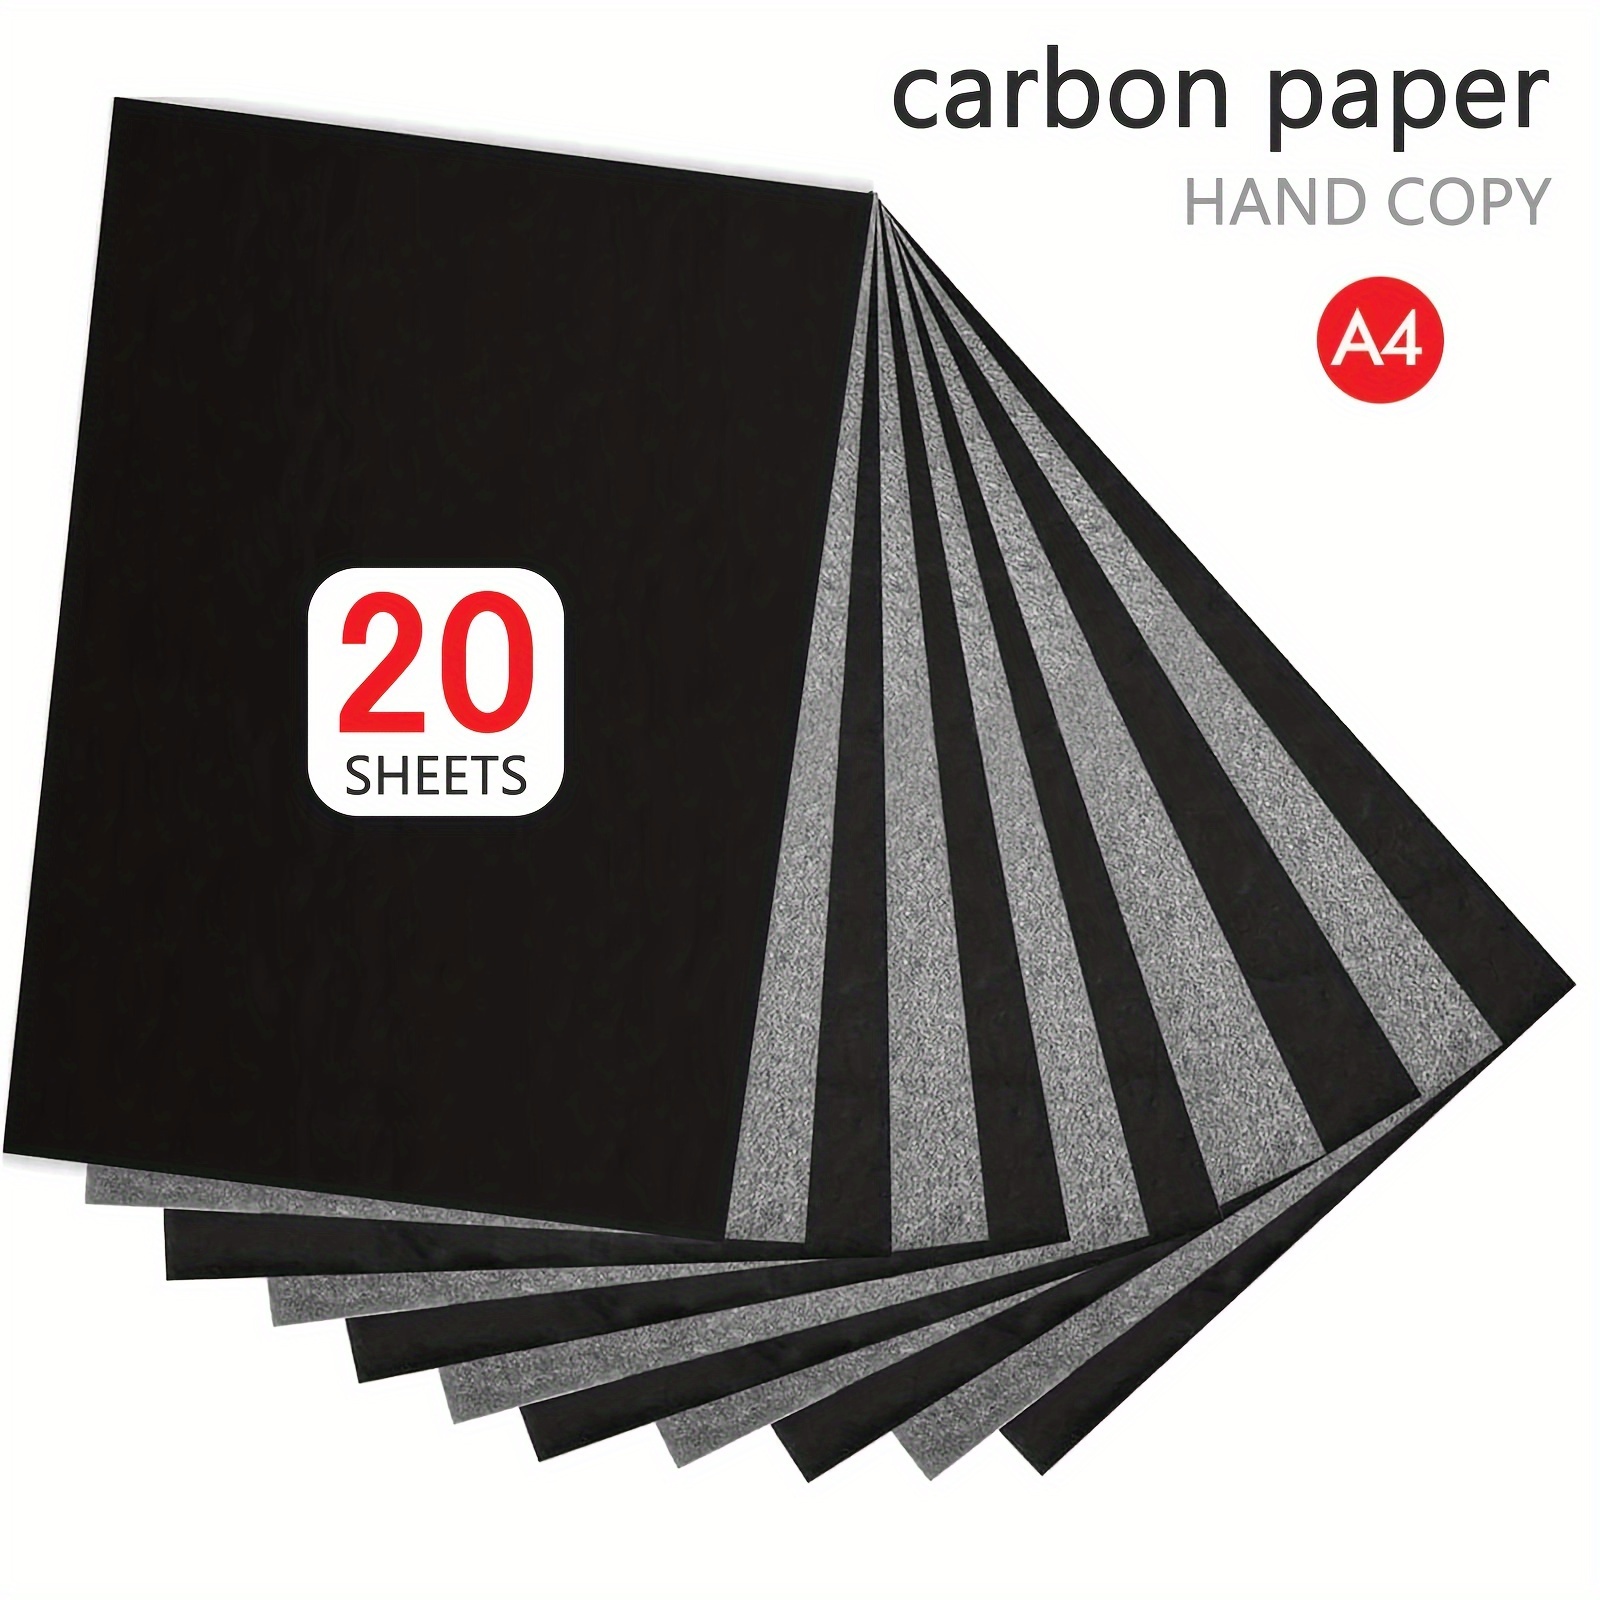 PSLER 30PCS White Carbon Transfer Paper for Wood Burning Craft, Paper,  Canvas and Other Art Craft Surfaces A4 Size 8.27 X 11.81 Inch